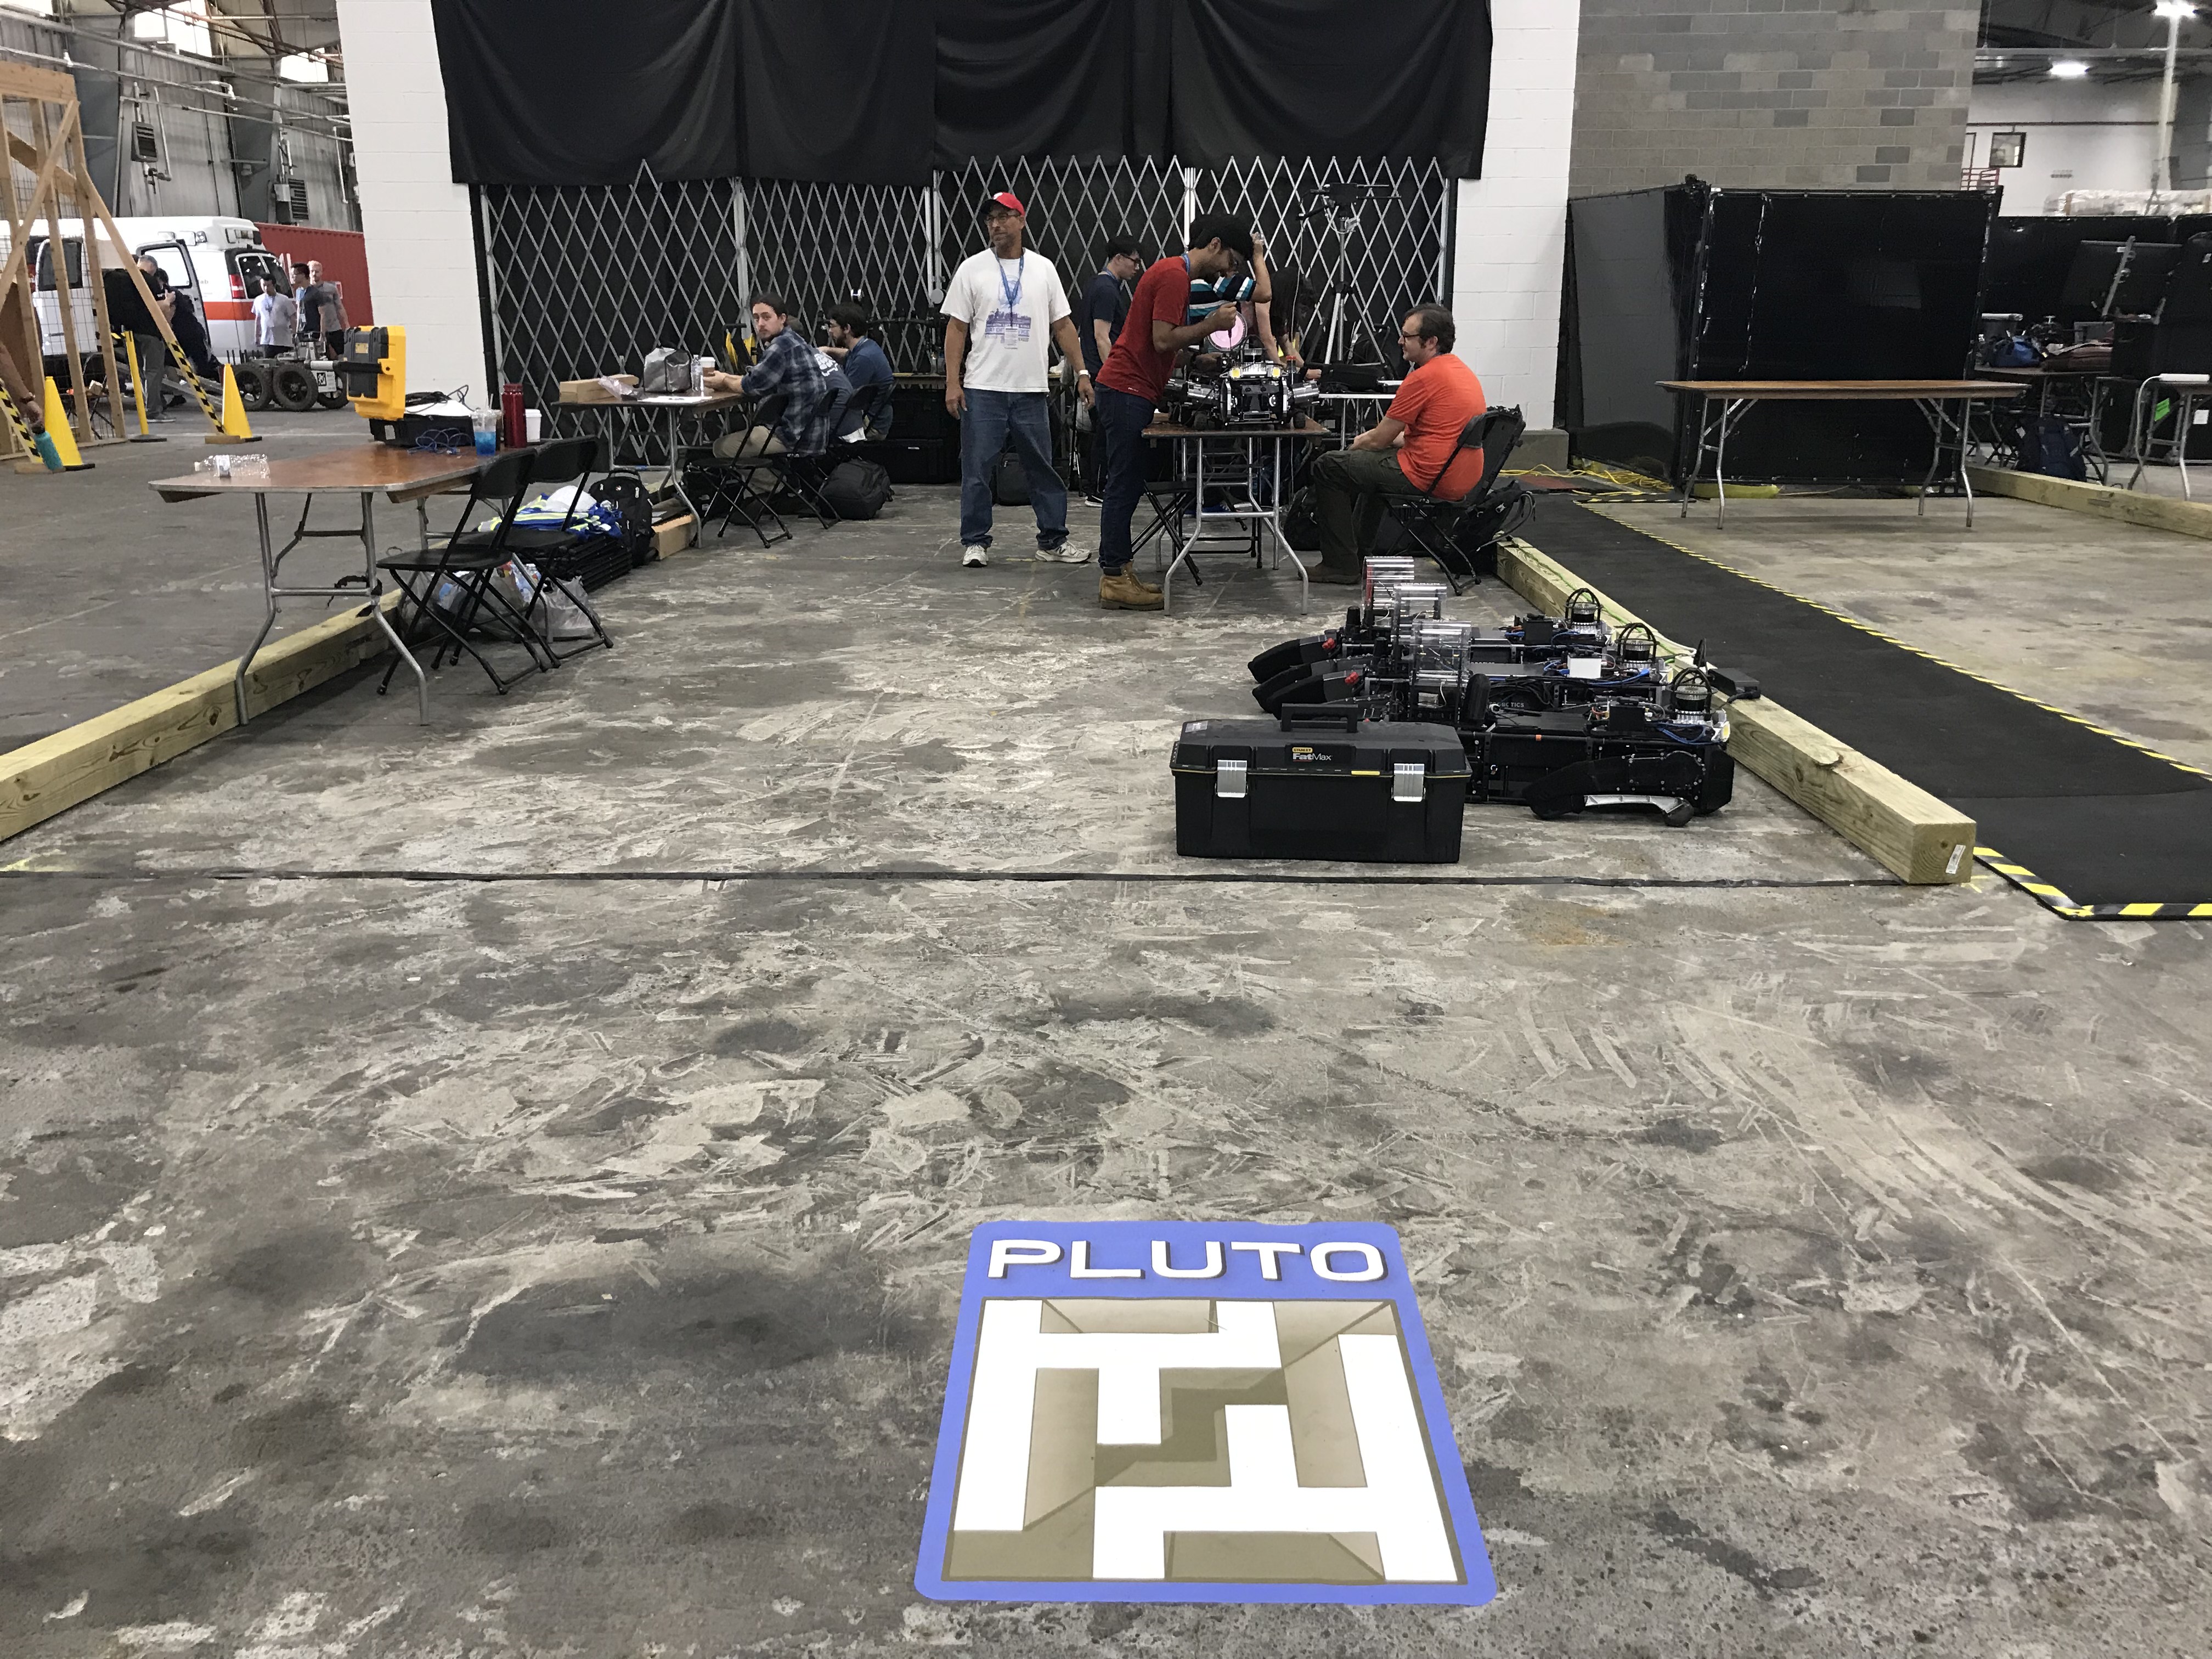 the PLUTO logo on a concrete floor with a team of students in the background sitting on chairs at tables and the folded up dog robots in front of the people